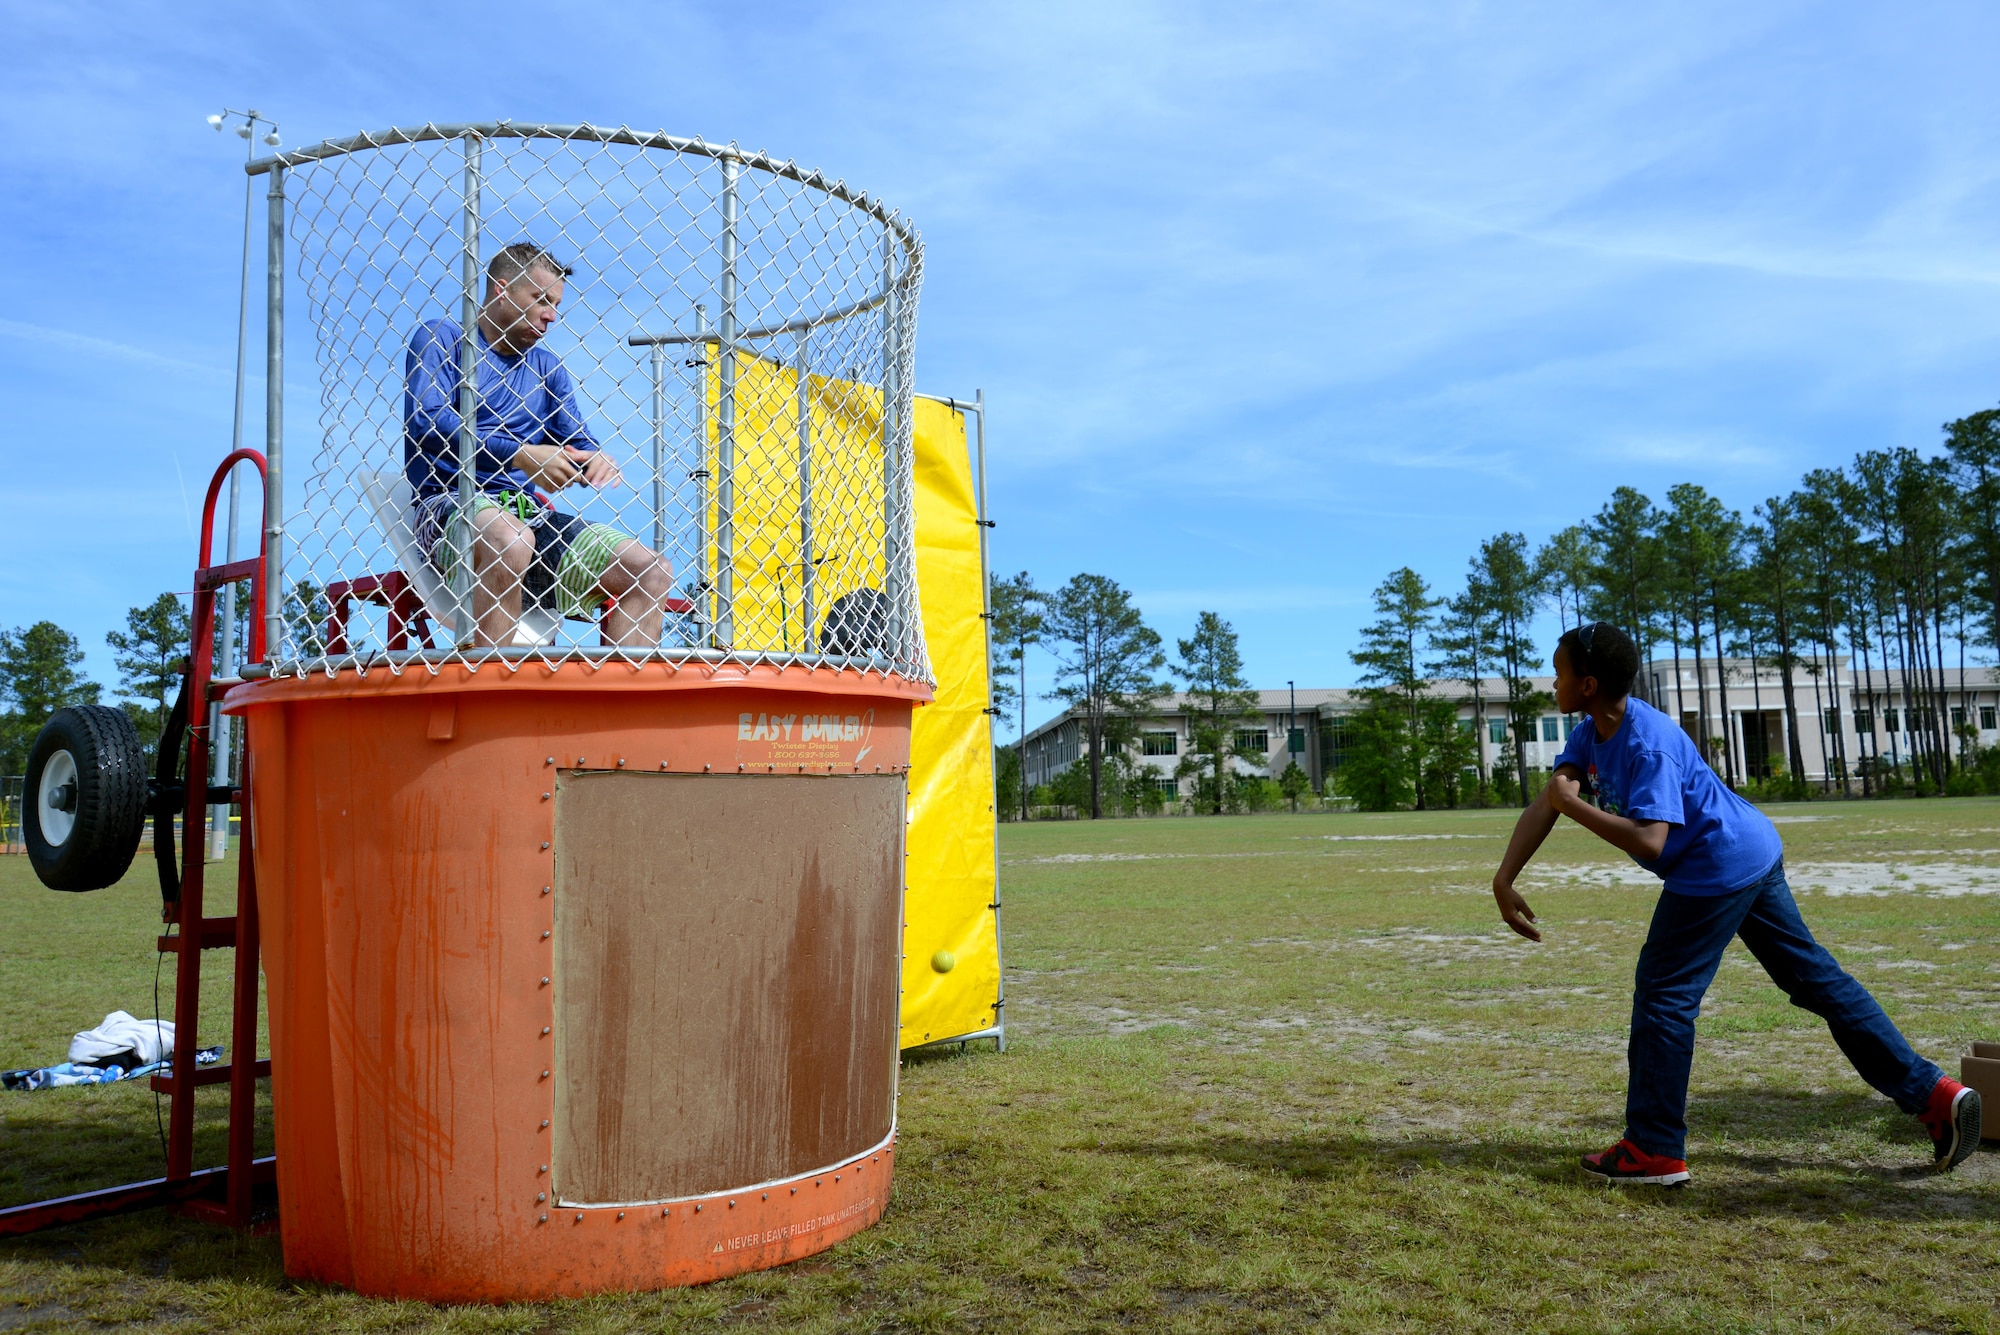 U.S. Air Force Lt. Col. William Clayton, 20th Force Support Squadron commander, left, falls into a tank of water after a Team Shaw child hits a target with a ball during a Month of the Military Child (MOMC) celebration at Shaw Air Force Base, S.C., April 8, 2017. The MOMC was first recognized in 1986 to show support for military children and highlight the sacrifices they make while their parents serve. (U.S. Air Force photo by Airman 1st Class Kathryn R.C. Reaves)